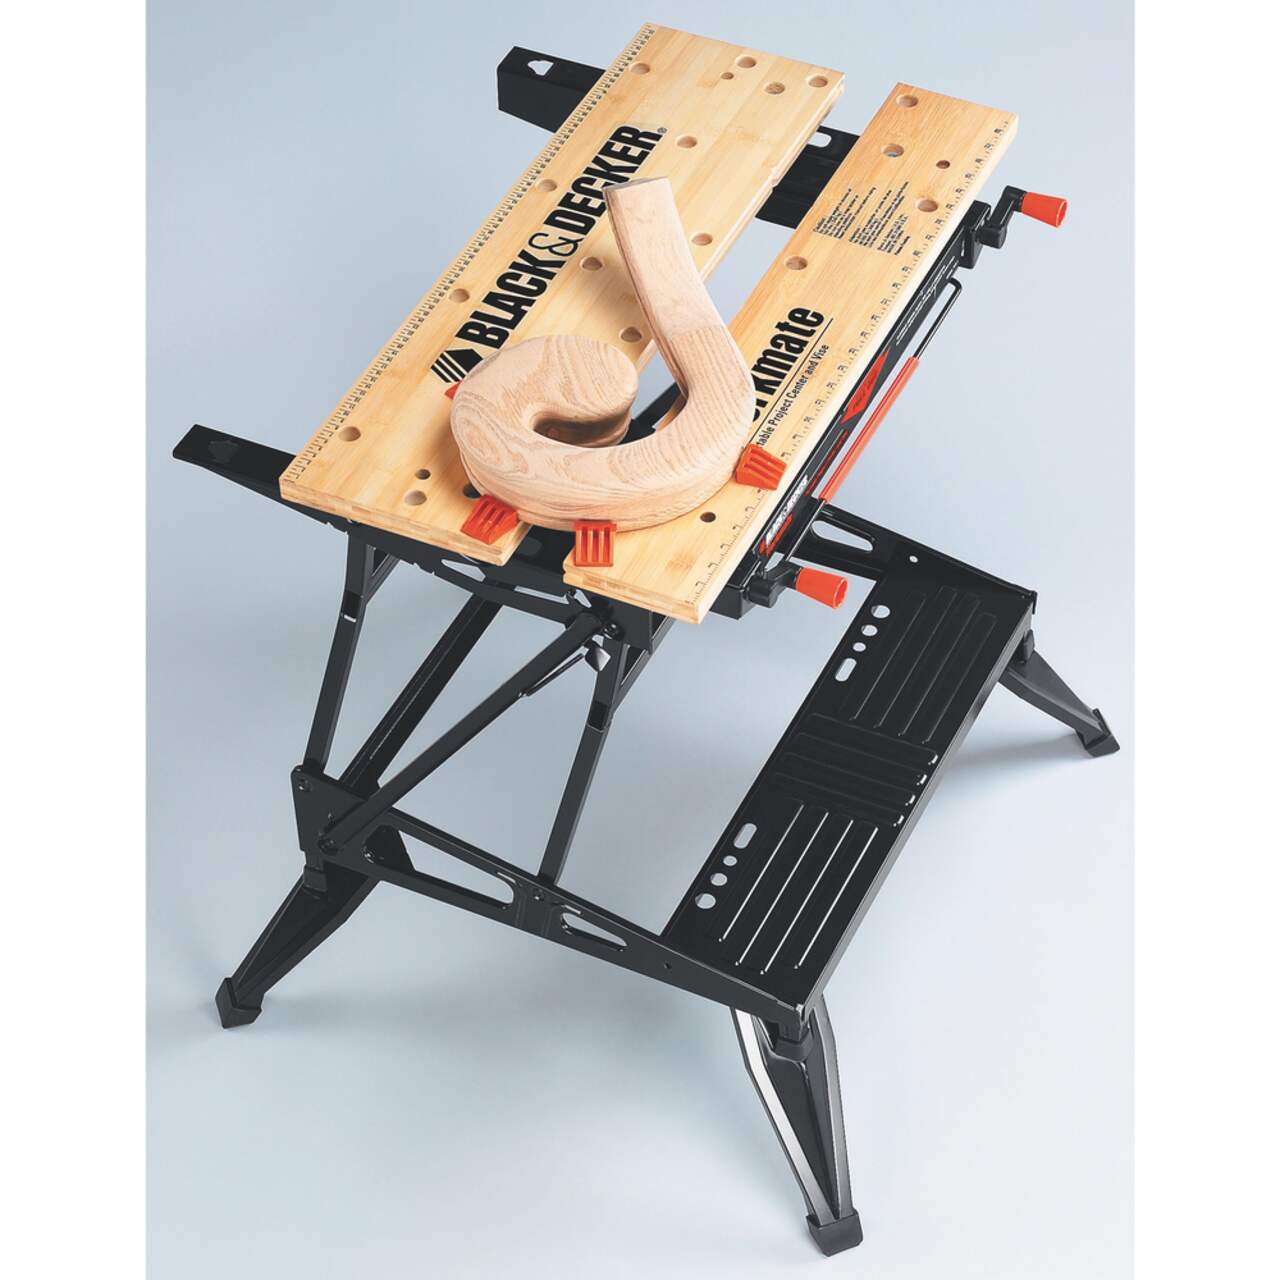 BLACK+DECKER Workmate 425 30 in. Folding Portable Workbench and